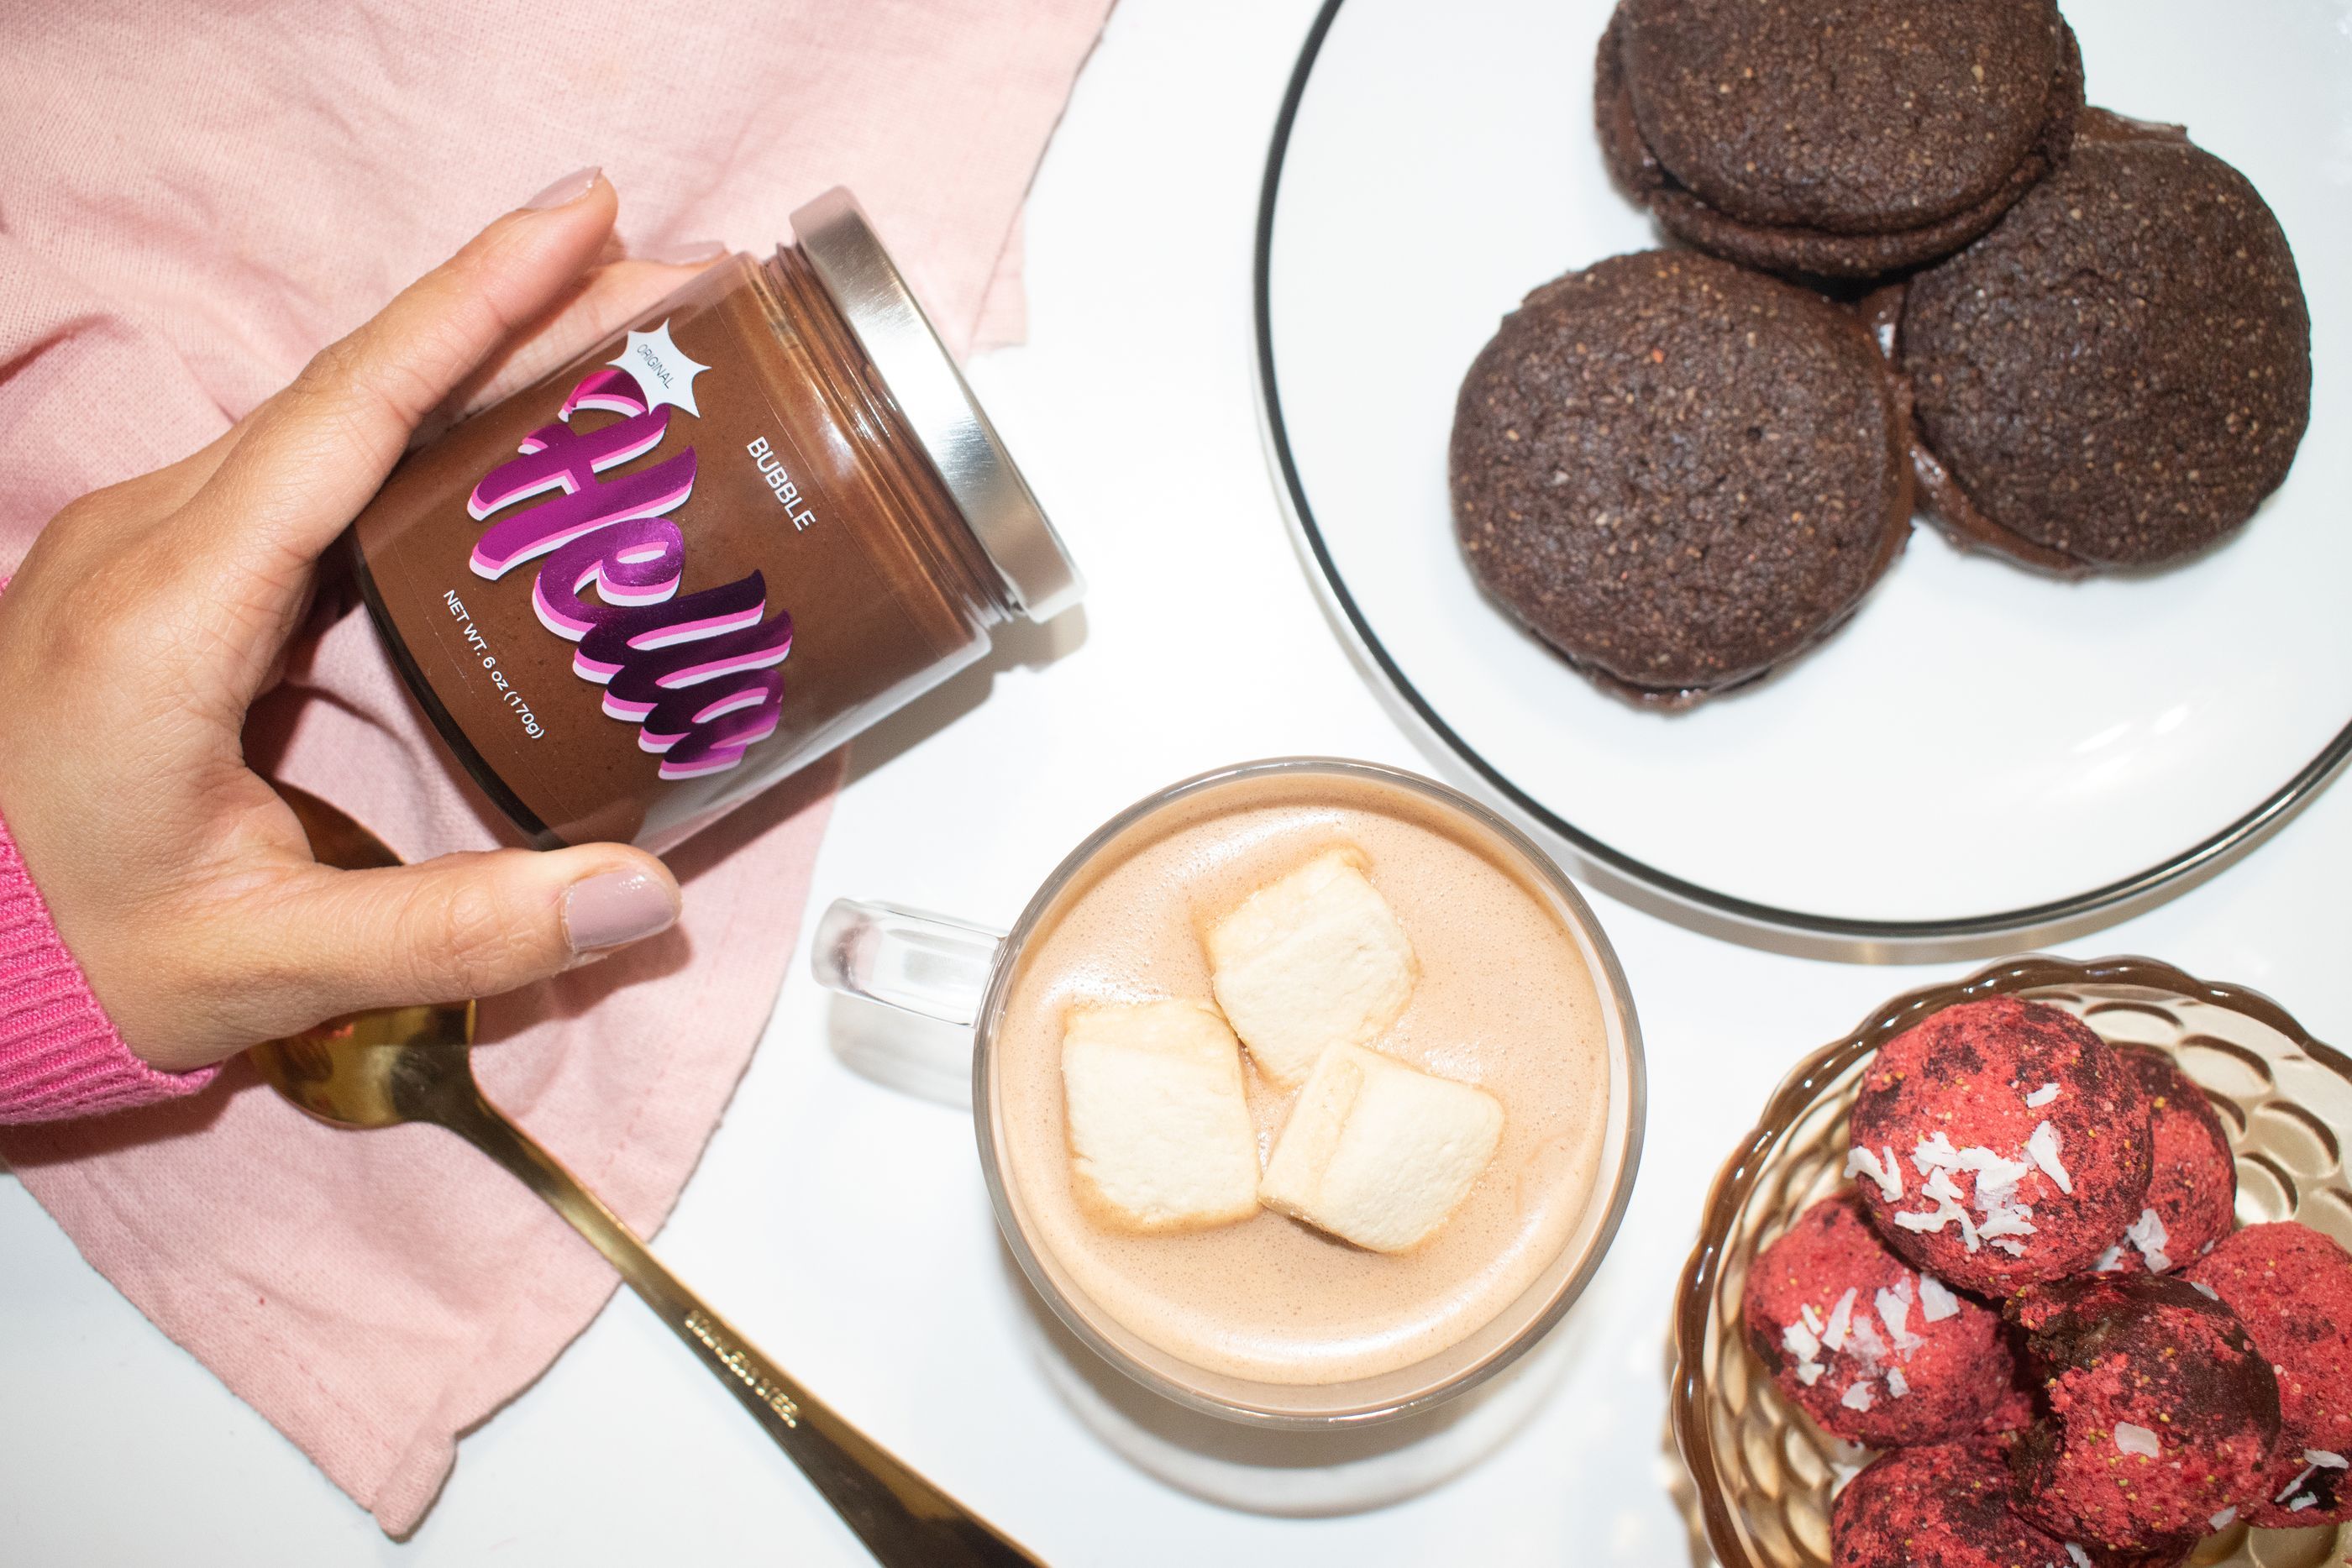 The 3-Ingredient (Vegan!) Chocolate Spread I Love Even More Than That Other One